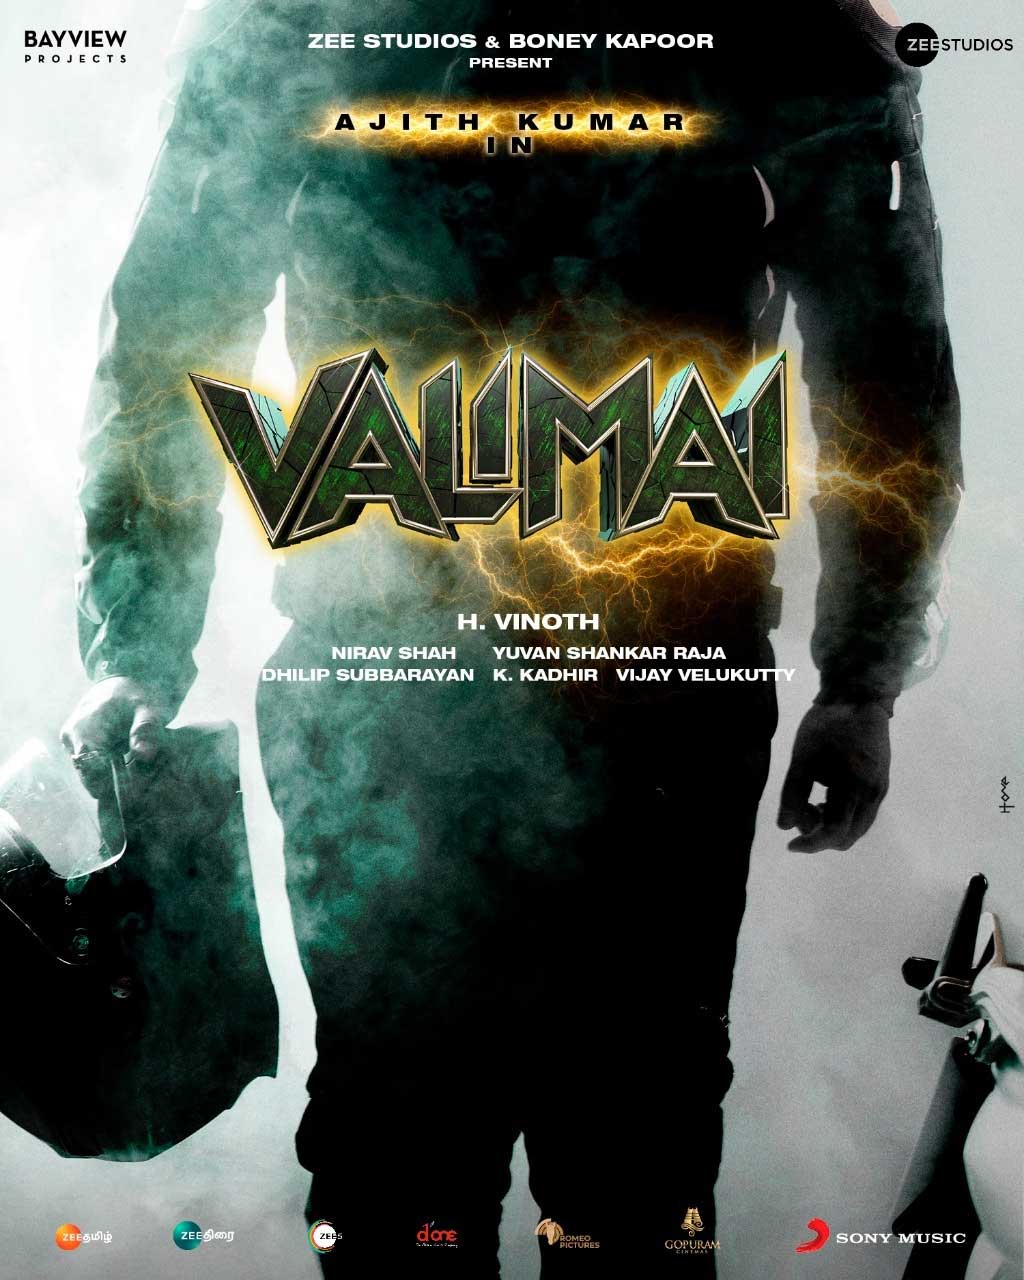 Valimai Movie Poster: Most Trending Movie News in 2021